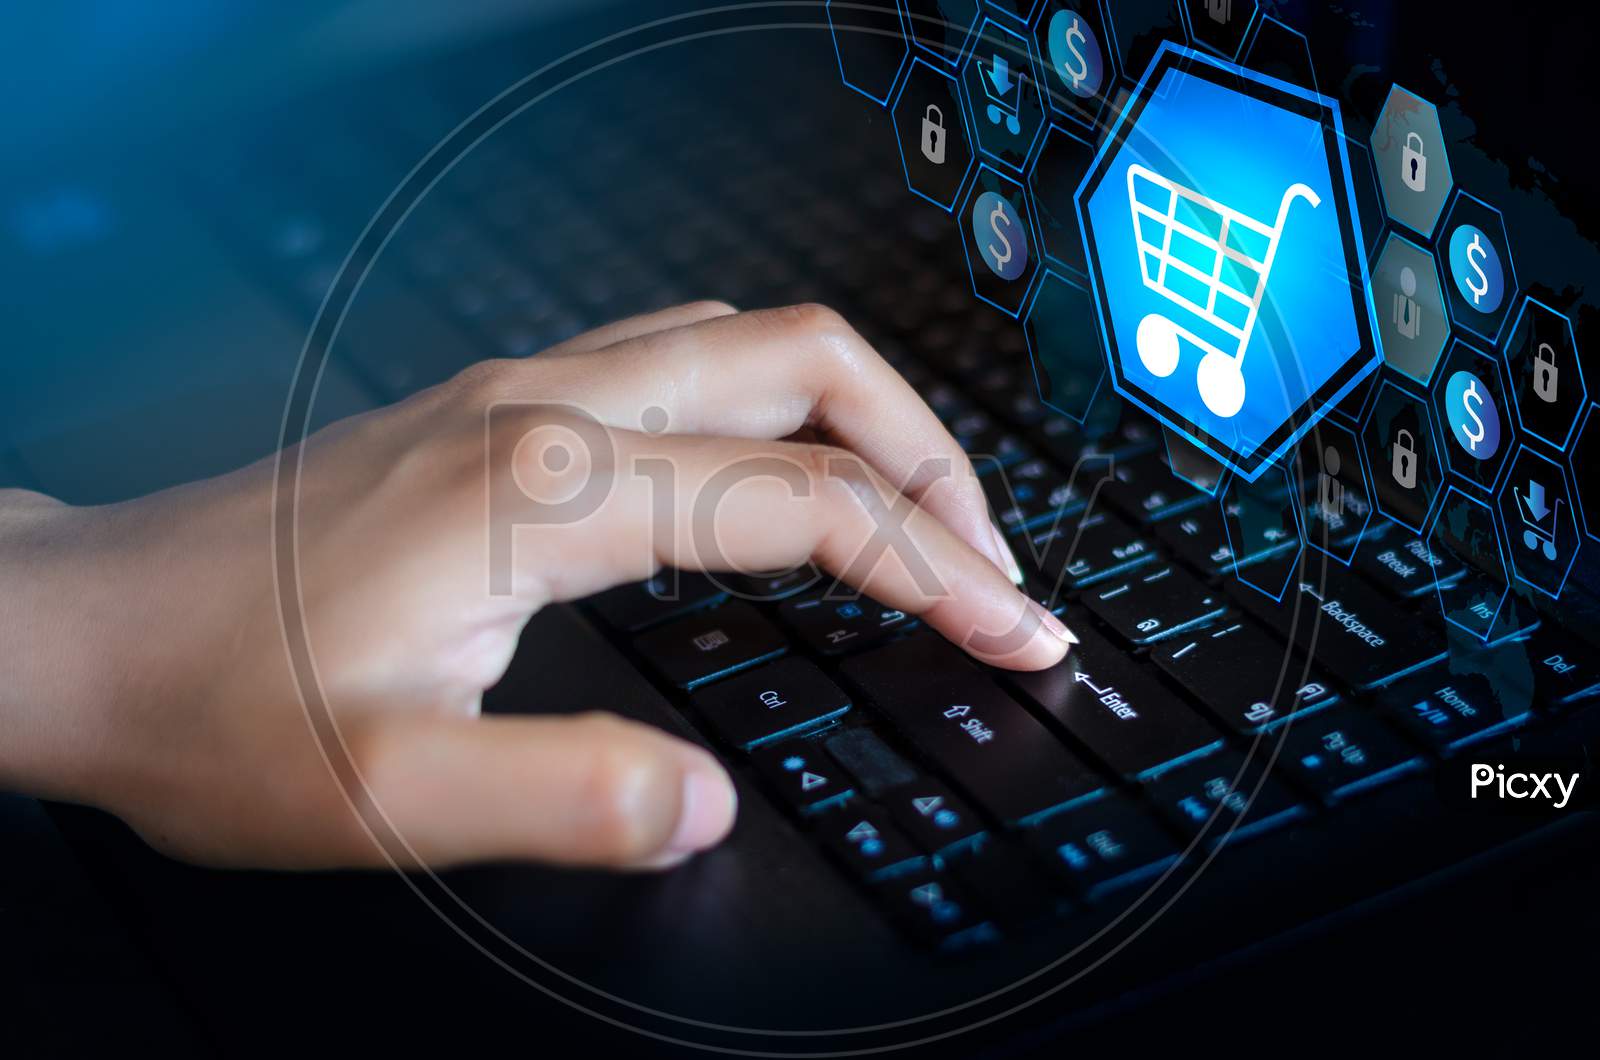 Press Enter Button On The Computer. Key Lock Security System Abstract Technology World Digital Shopping Order Transactions On The Internet